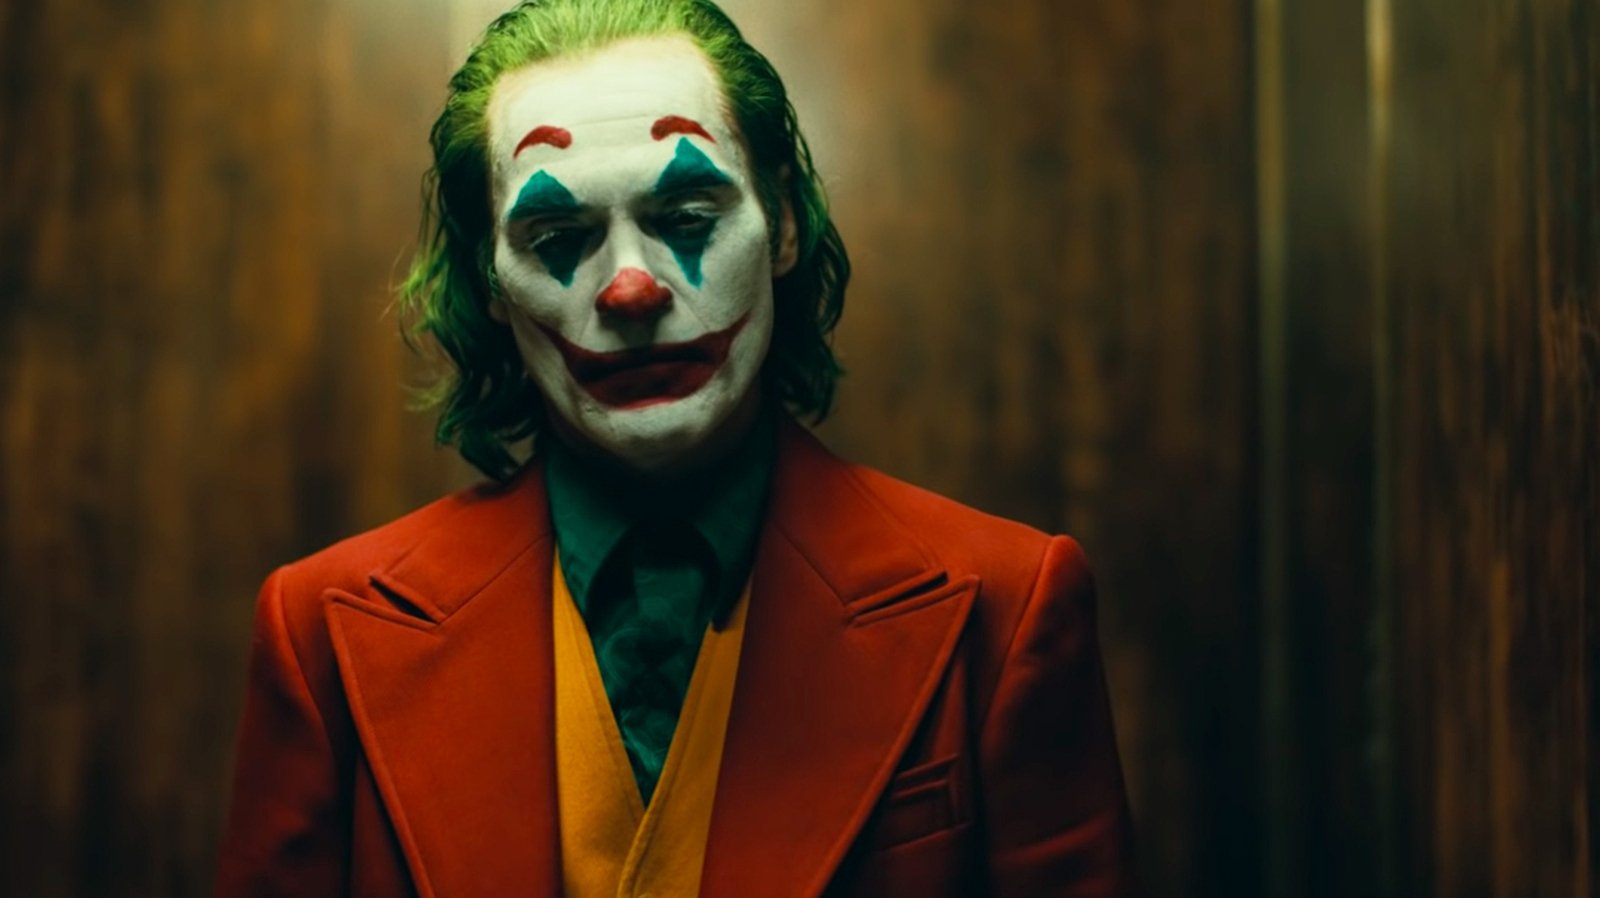 What Joker tells us about victimisation, crime and discontent